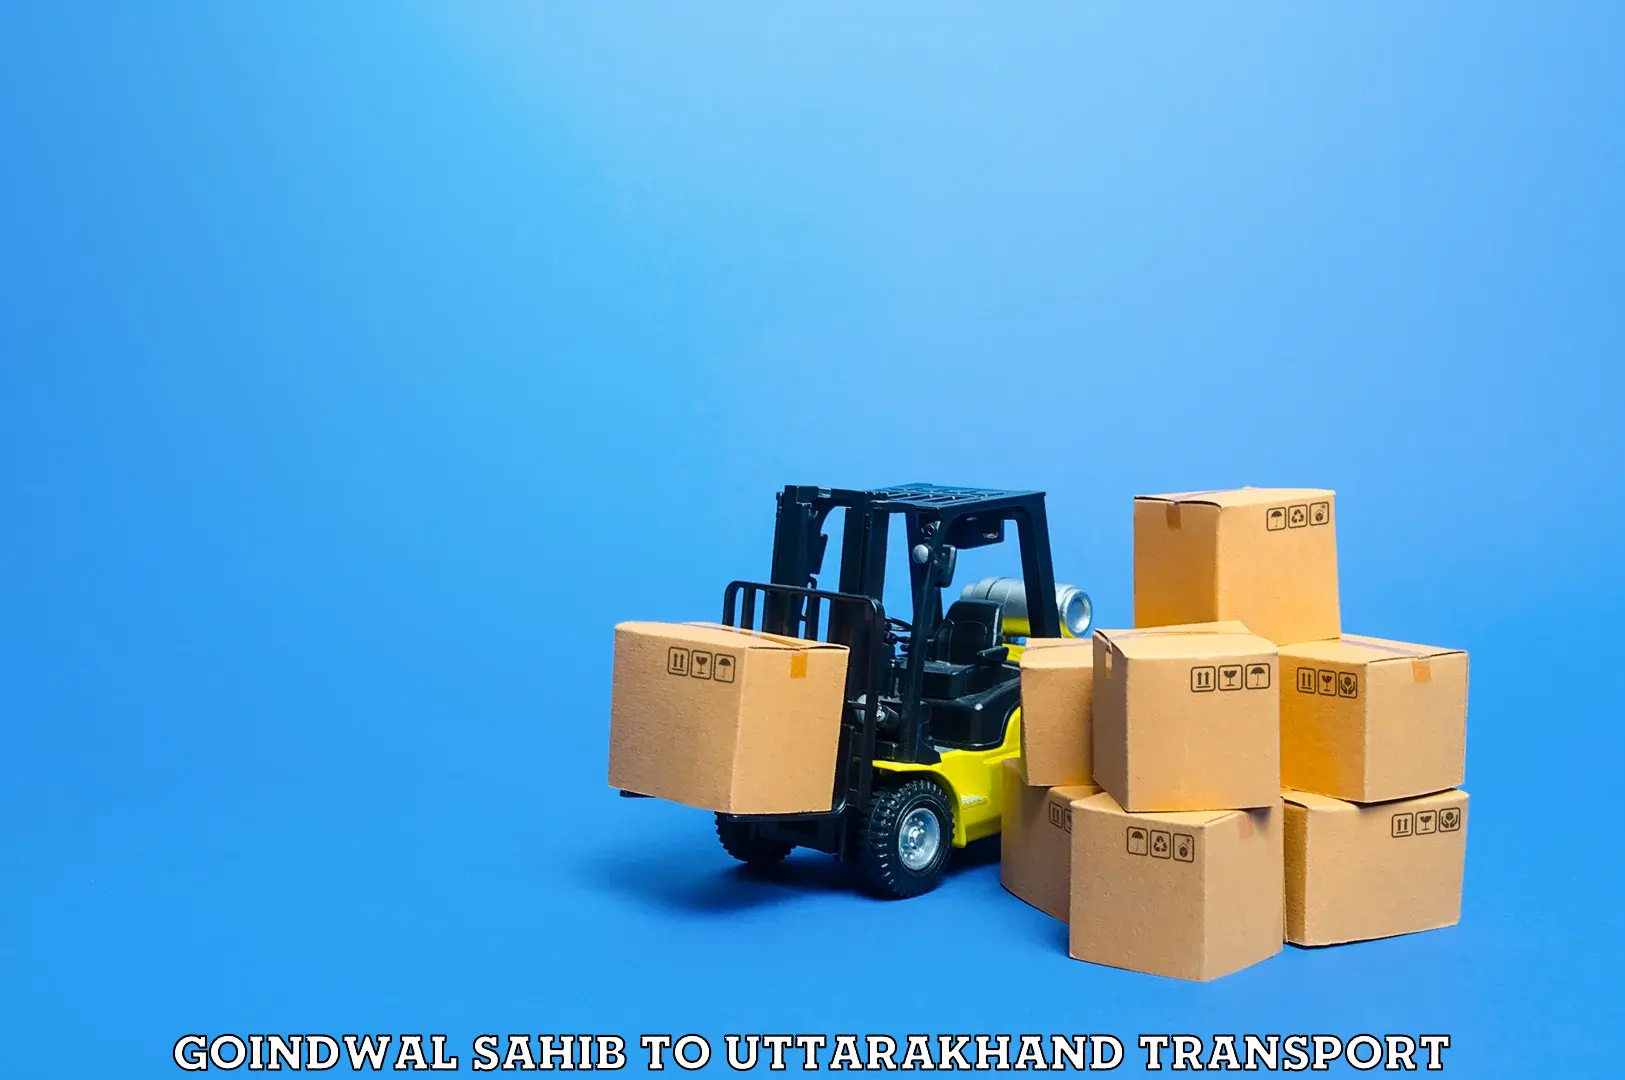 Goods delivery service Goindwal Sahib to Mussoorie